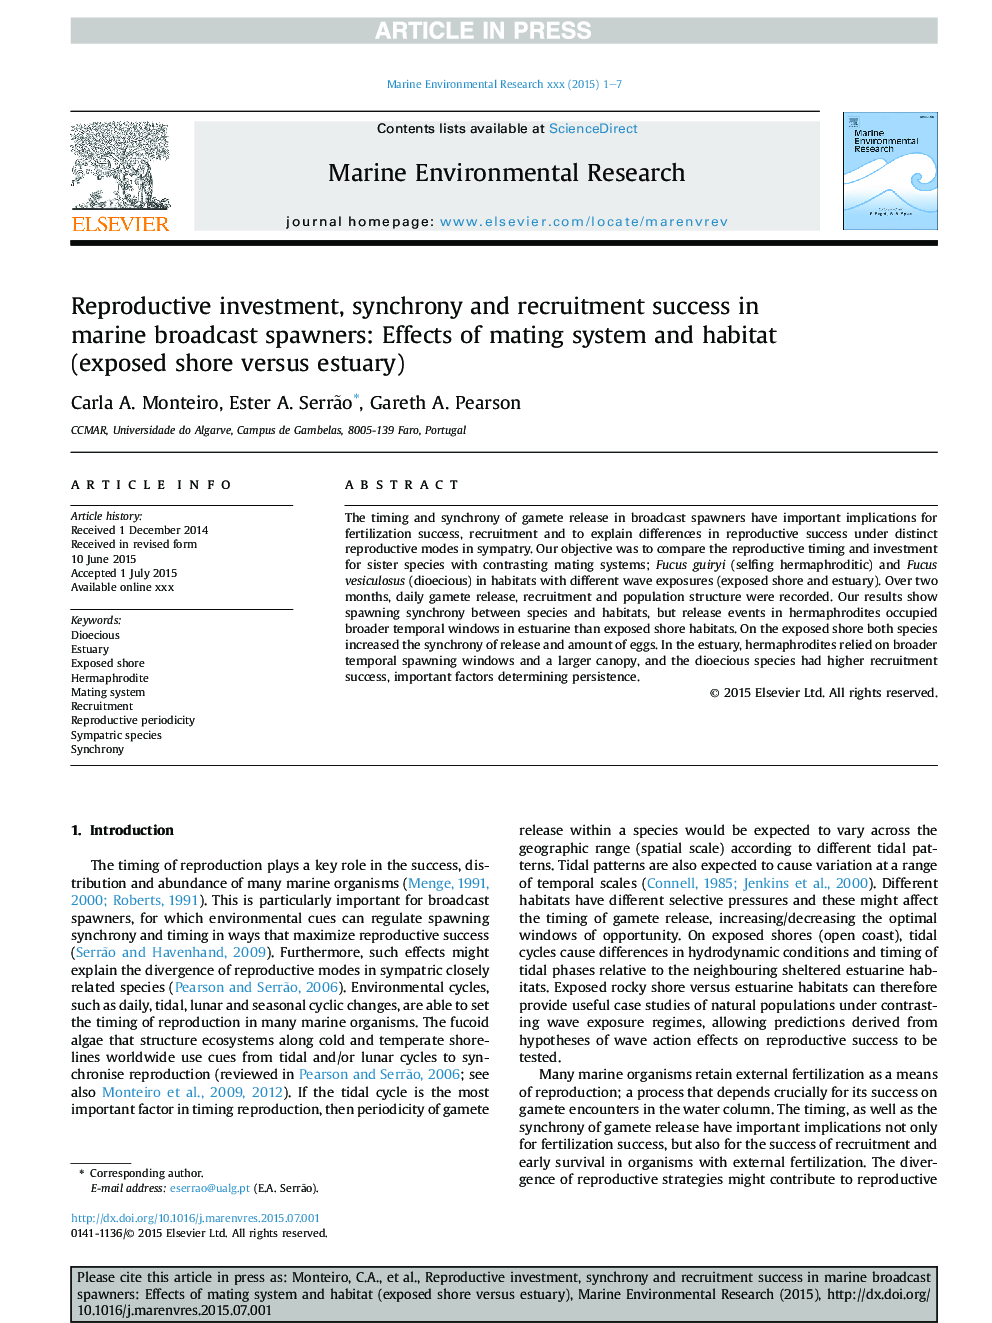 Reproductive investment, synchrony and recruitment success in marine broadcast spawners: Effects of mating system and habitat (exposed shore versus estuary)